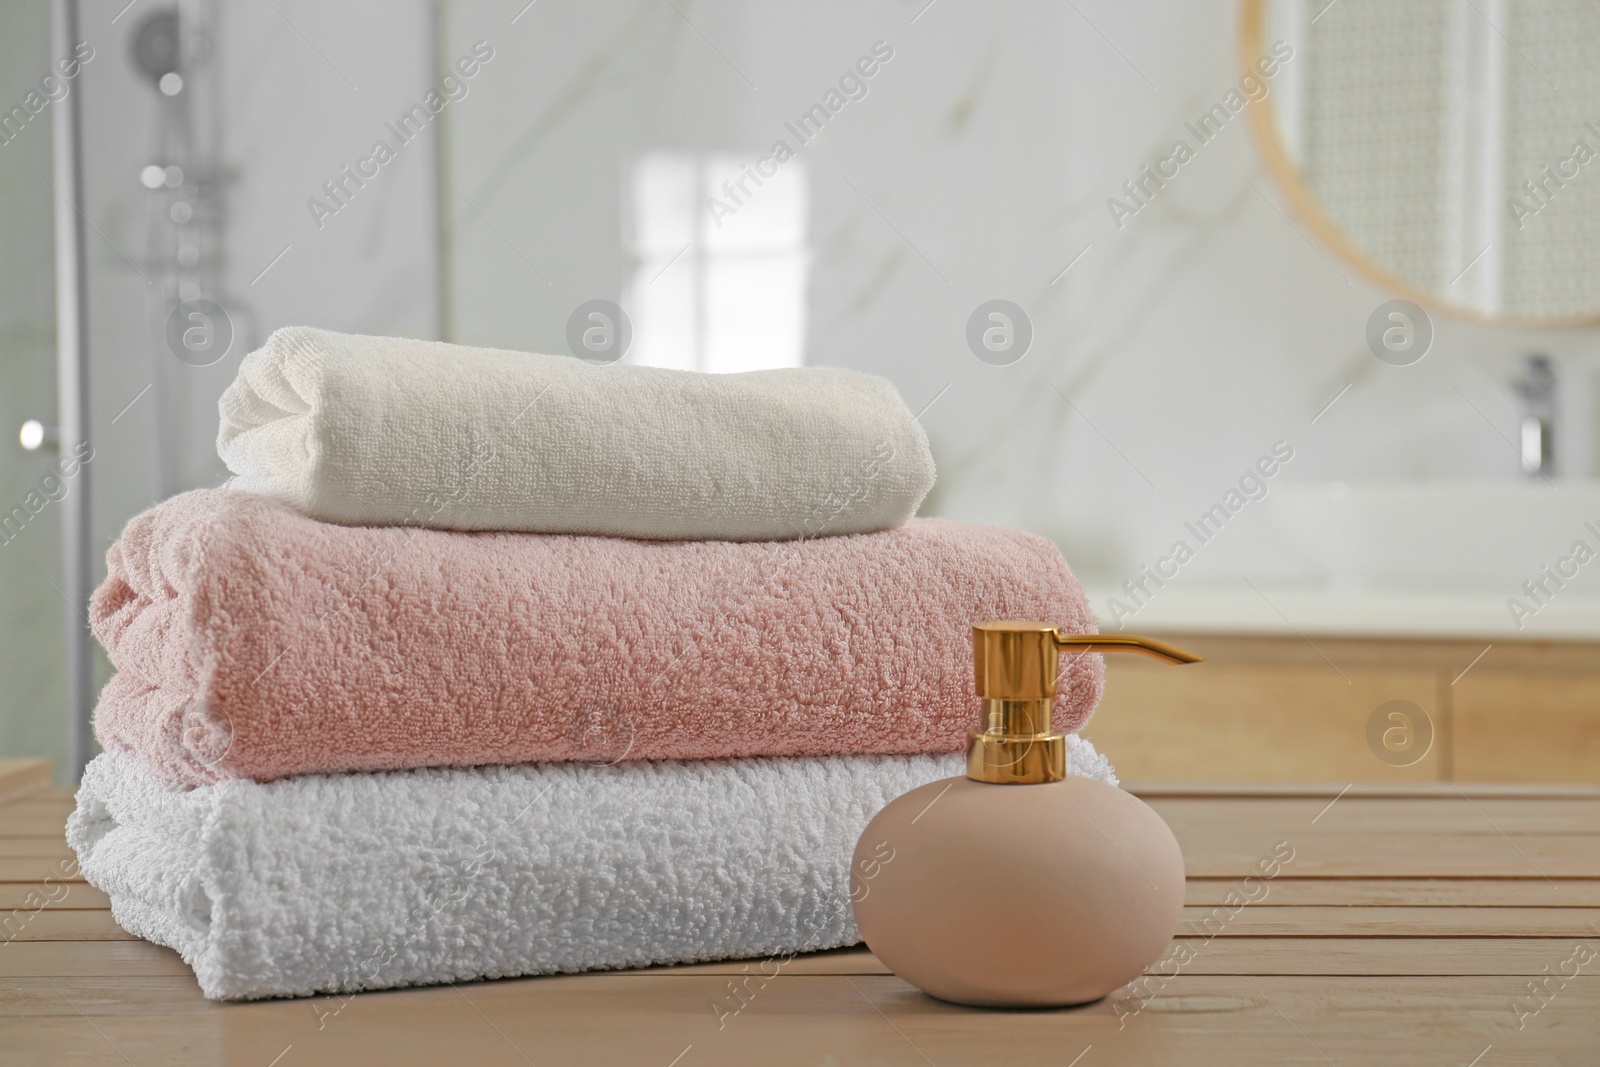 Photo of Stack of clean towels and soap dispenser on wooden table in bathroom